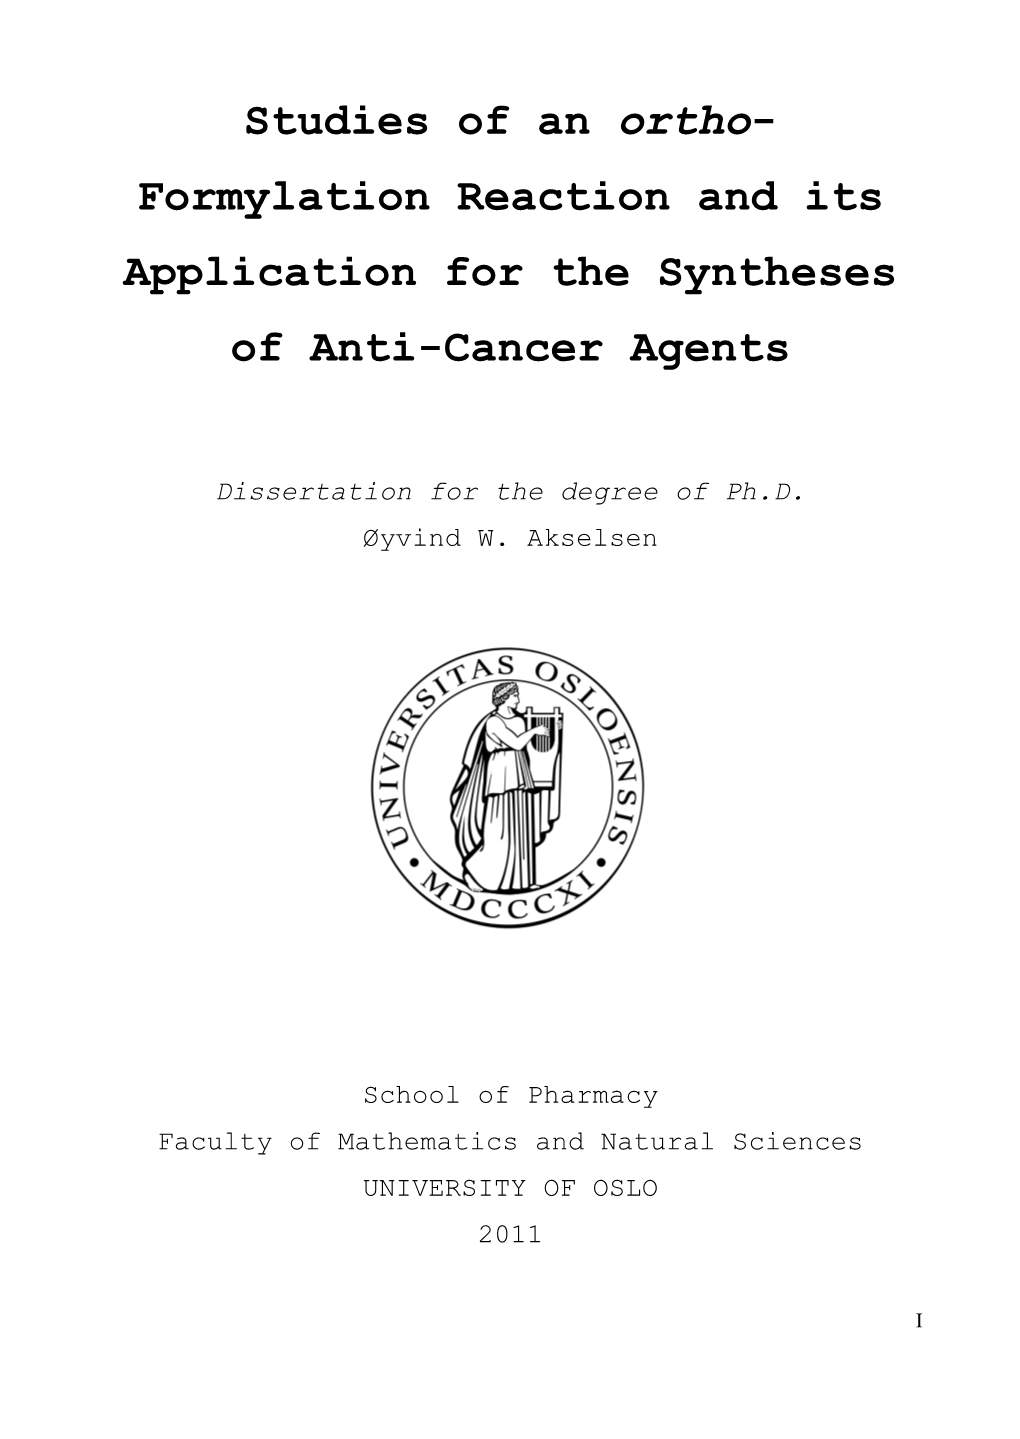 Studies of an Ortho- Formylation Reaction and Its Application for the Syntheses of Anti-Cancer Agents